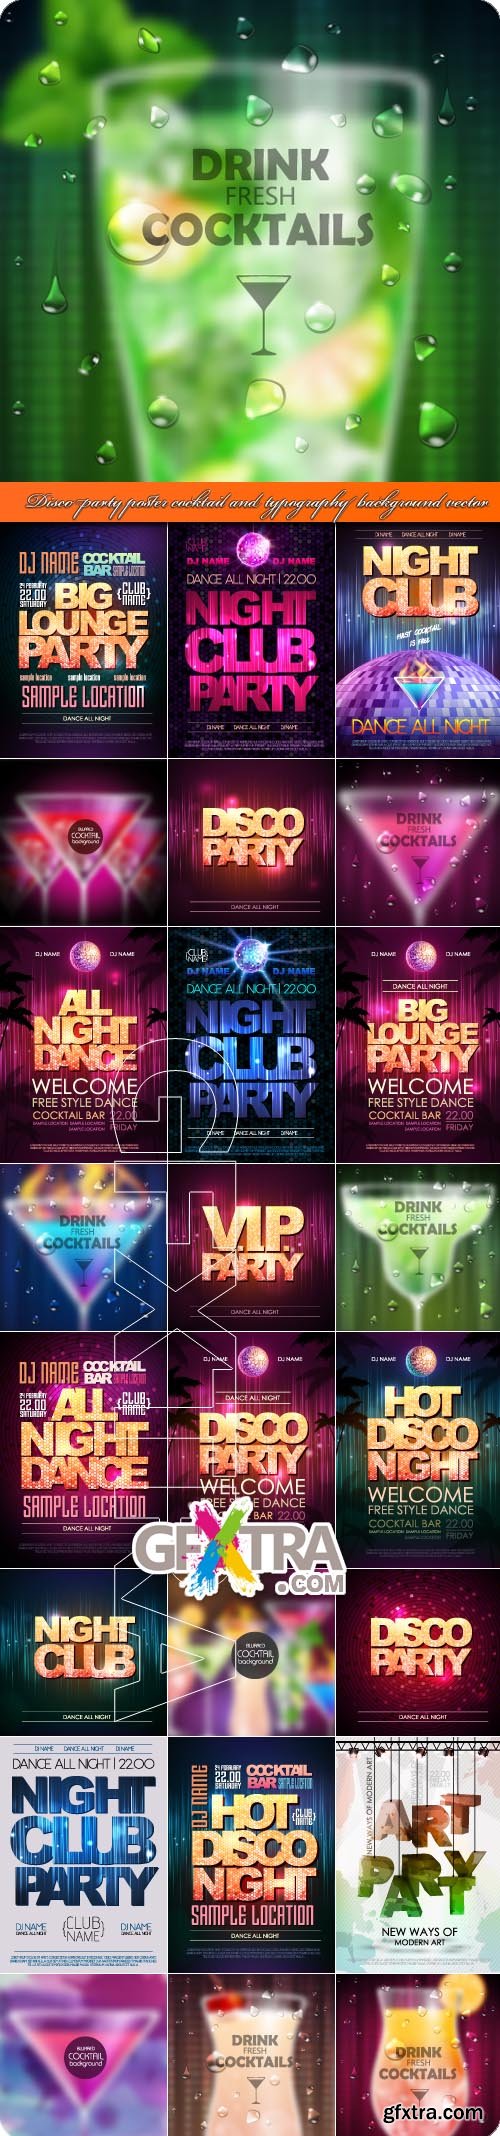 Disco party poster cocktail and typography background vector